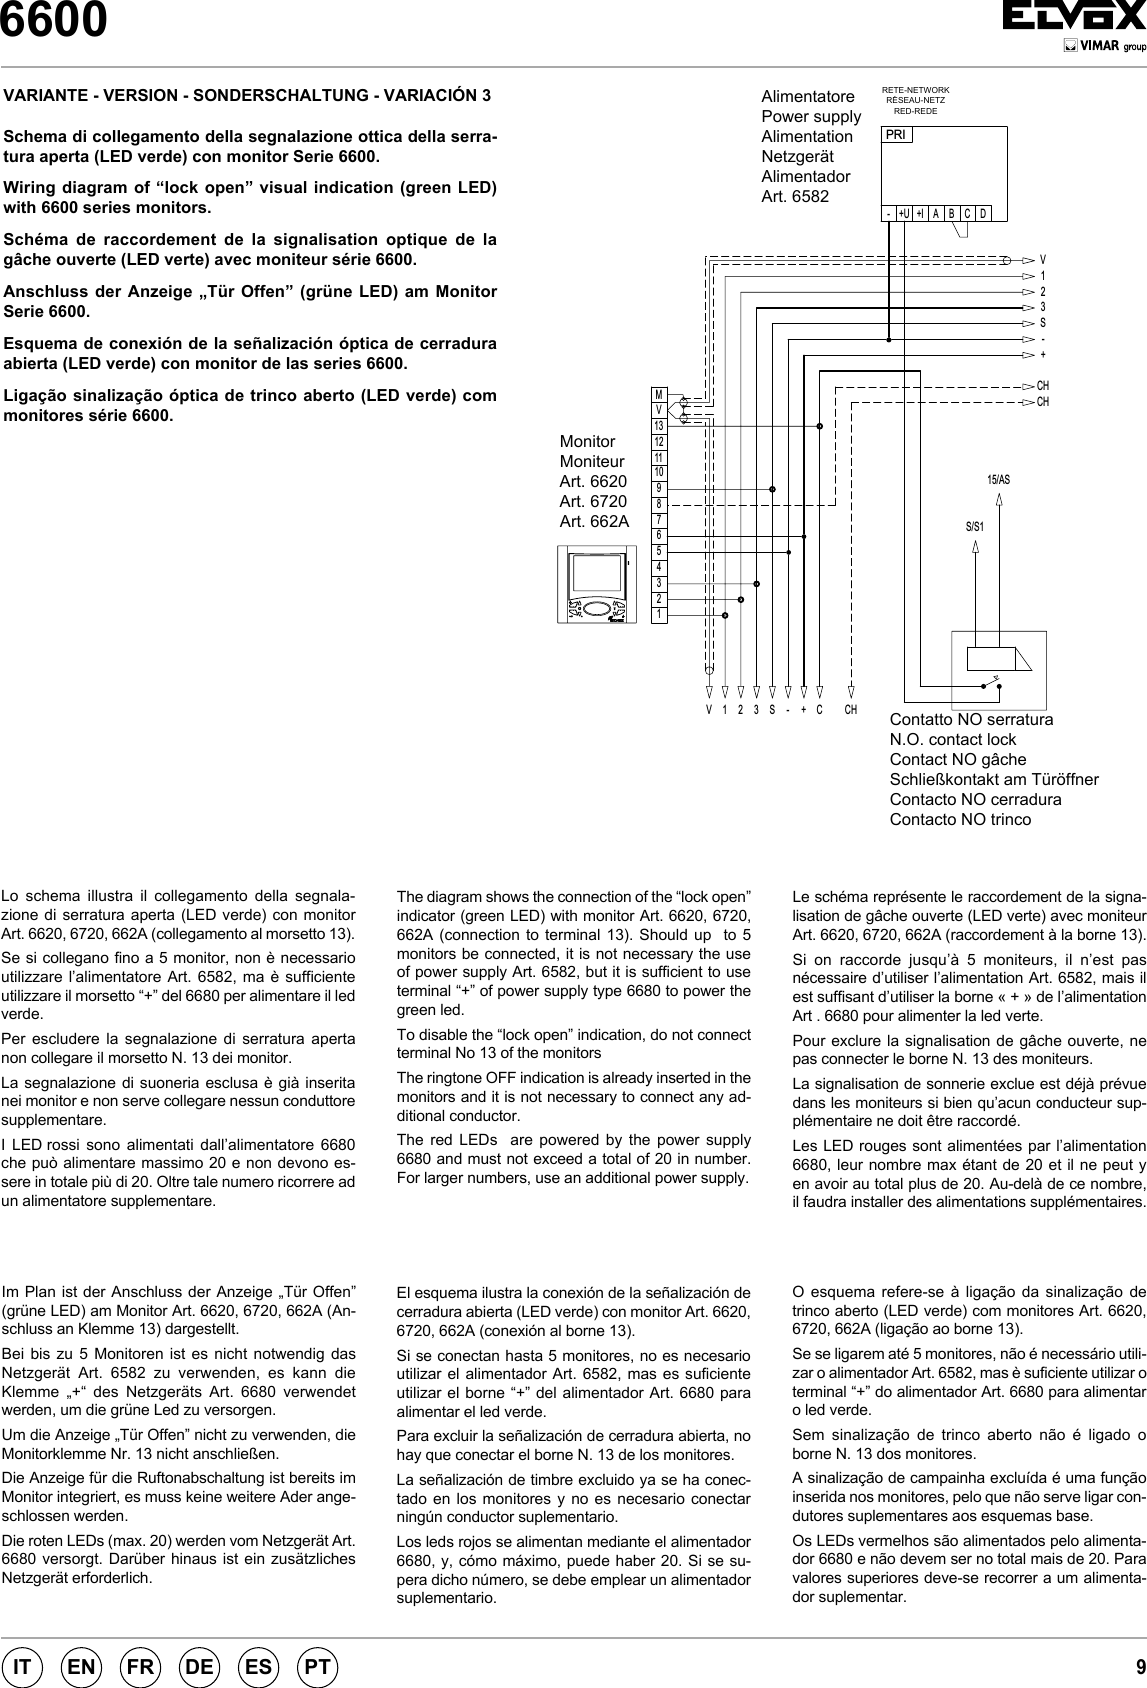 Page 9 of 12 - 6620 Installer Guide